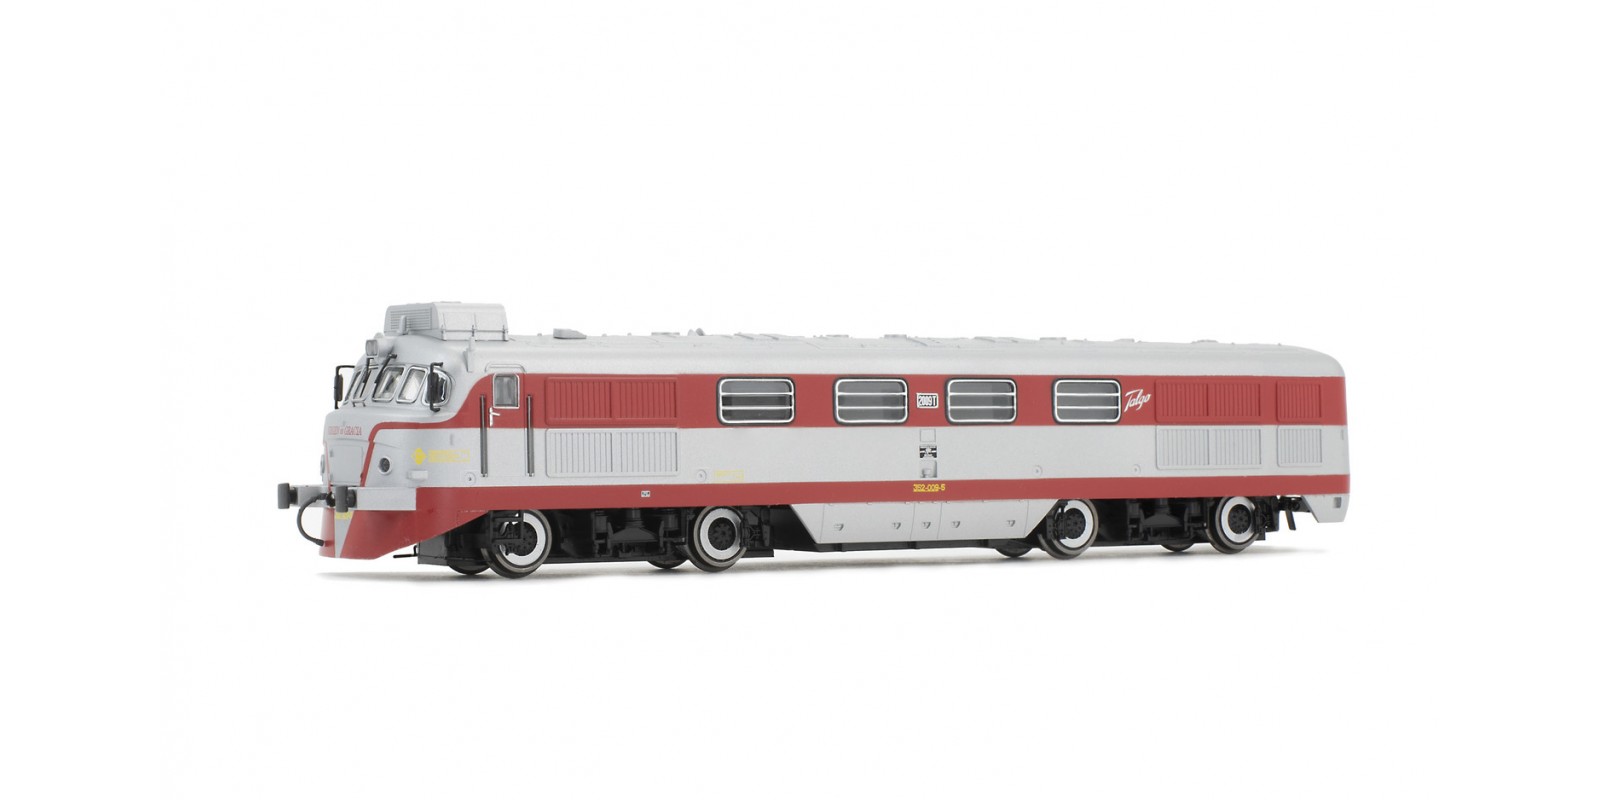 ET2328 RENFE, diesel locomotive Talgo 2009 "Virgen de Gracia", original livery, with armored glass, without conditioned air, period IV